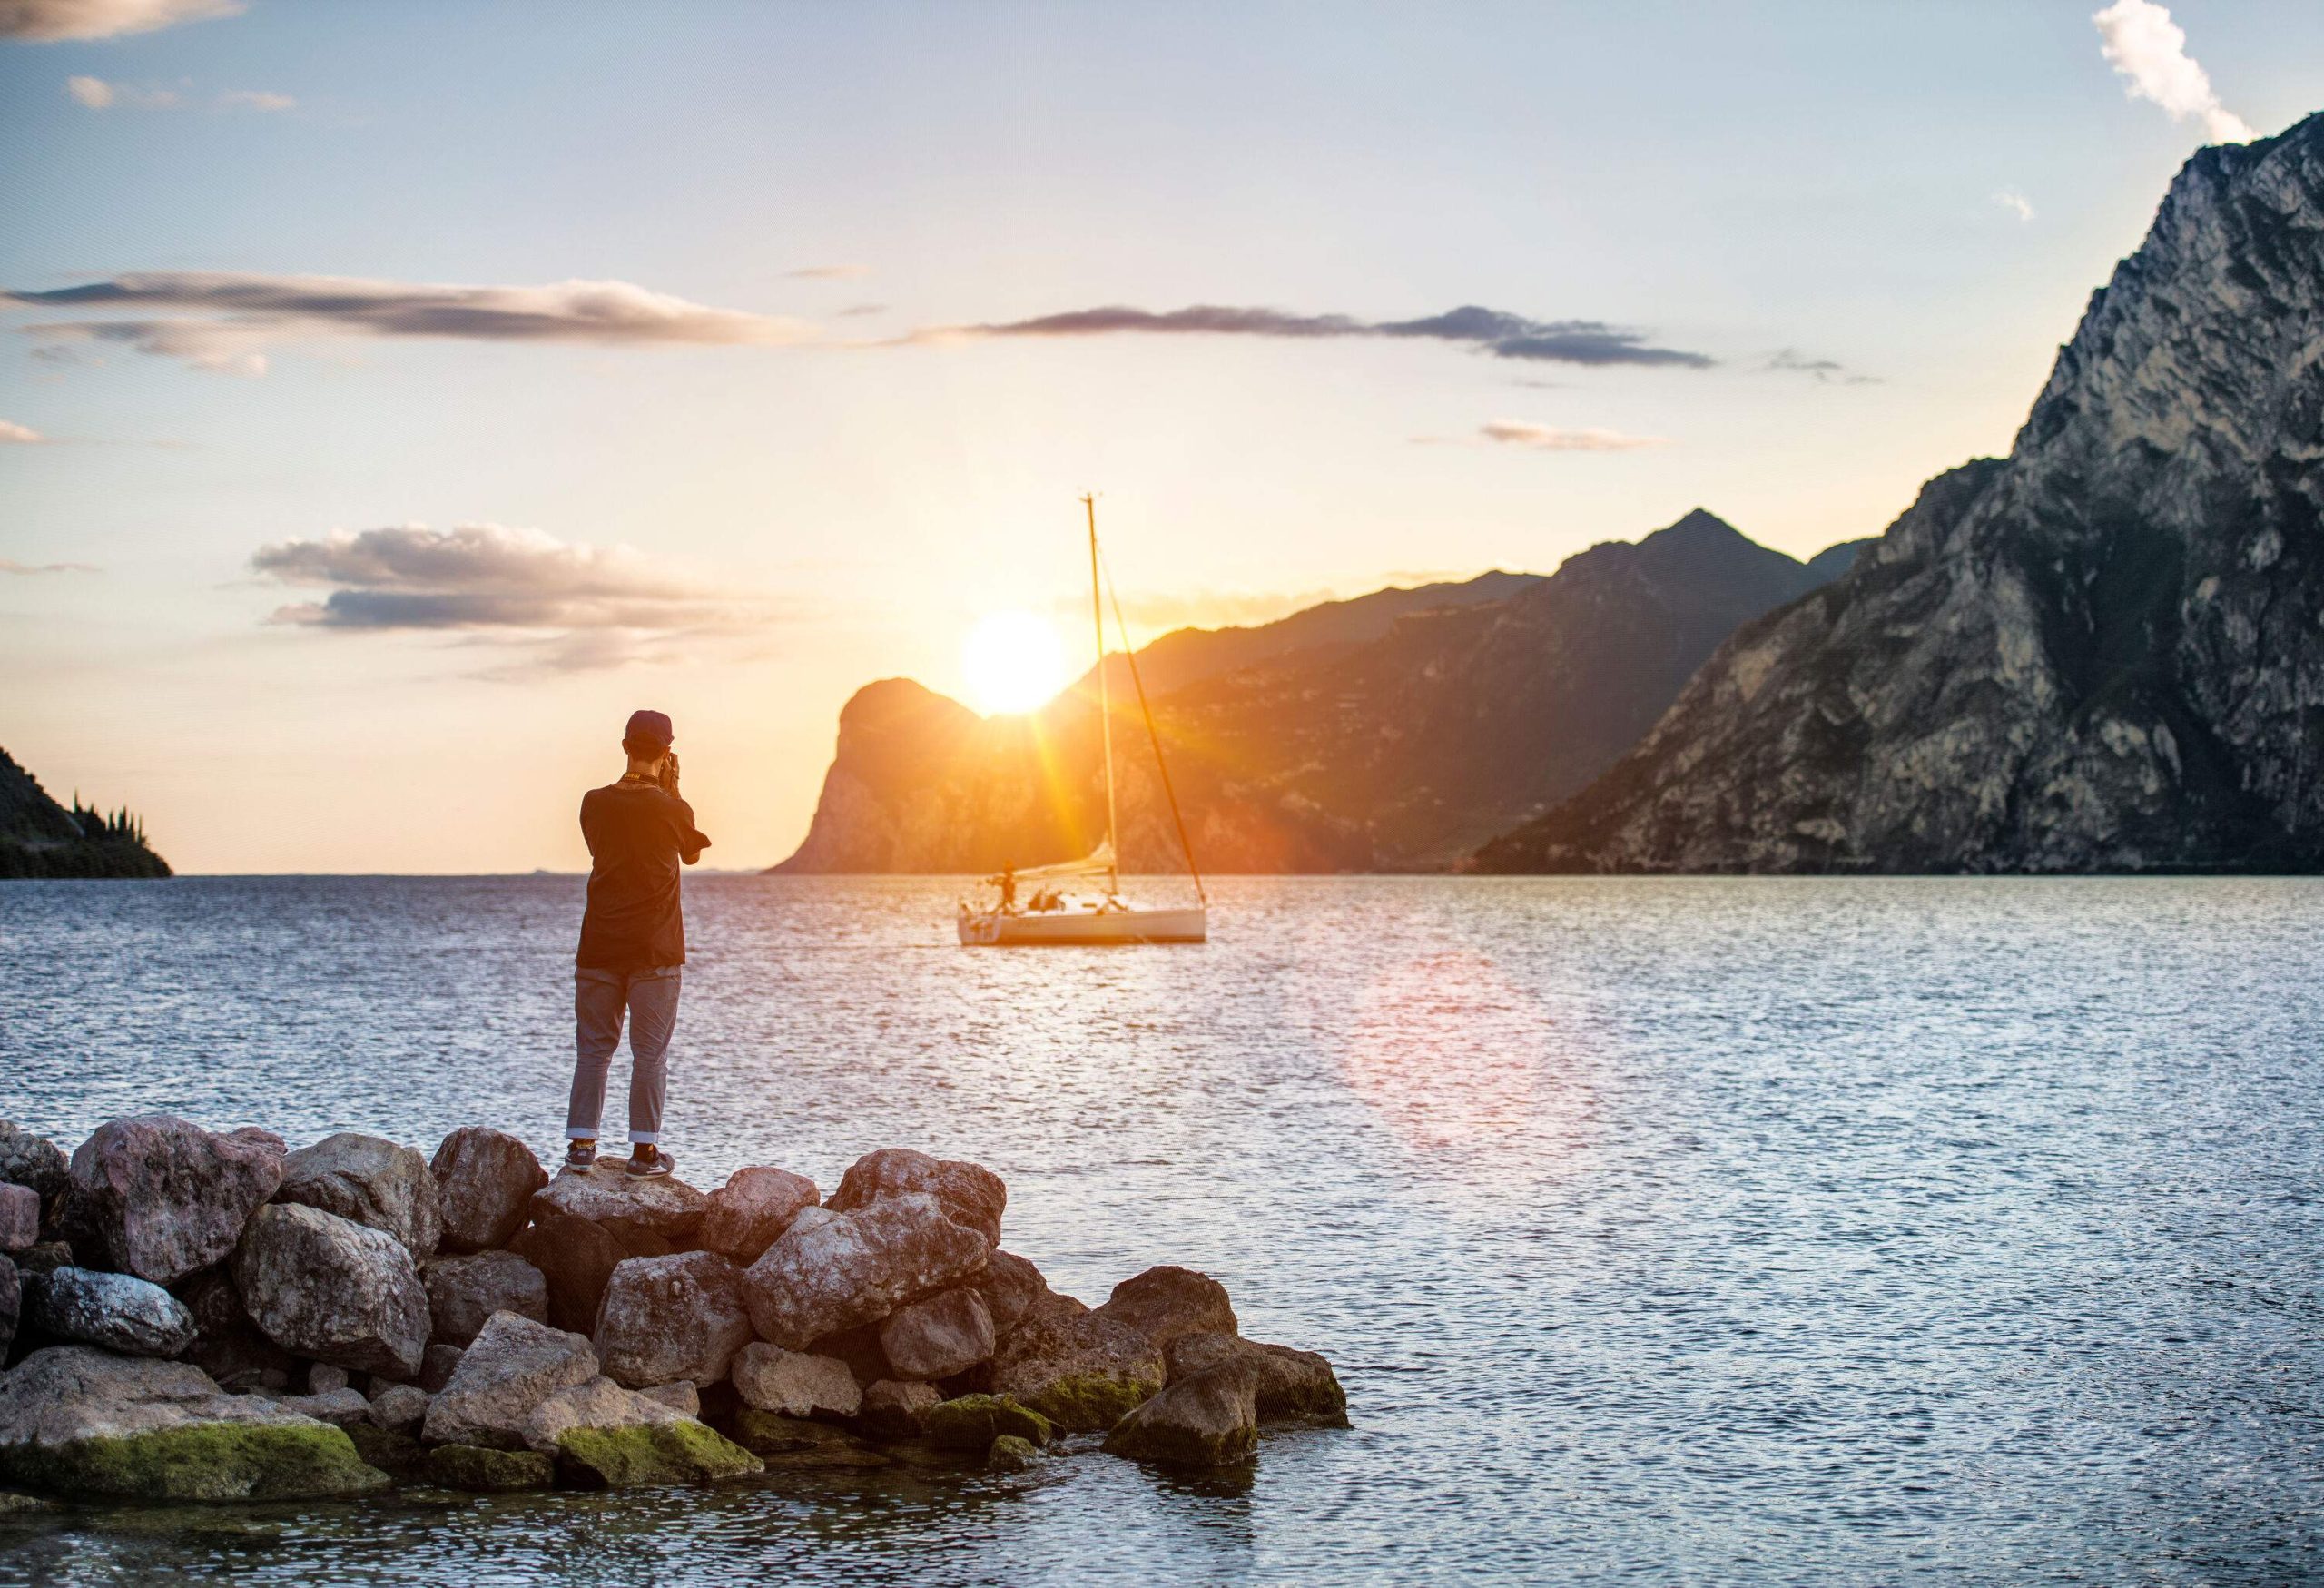 A man standing on a rock taking photos of a sailing boat on a lake surrounded by tall mountains at sunrise.